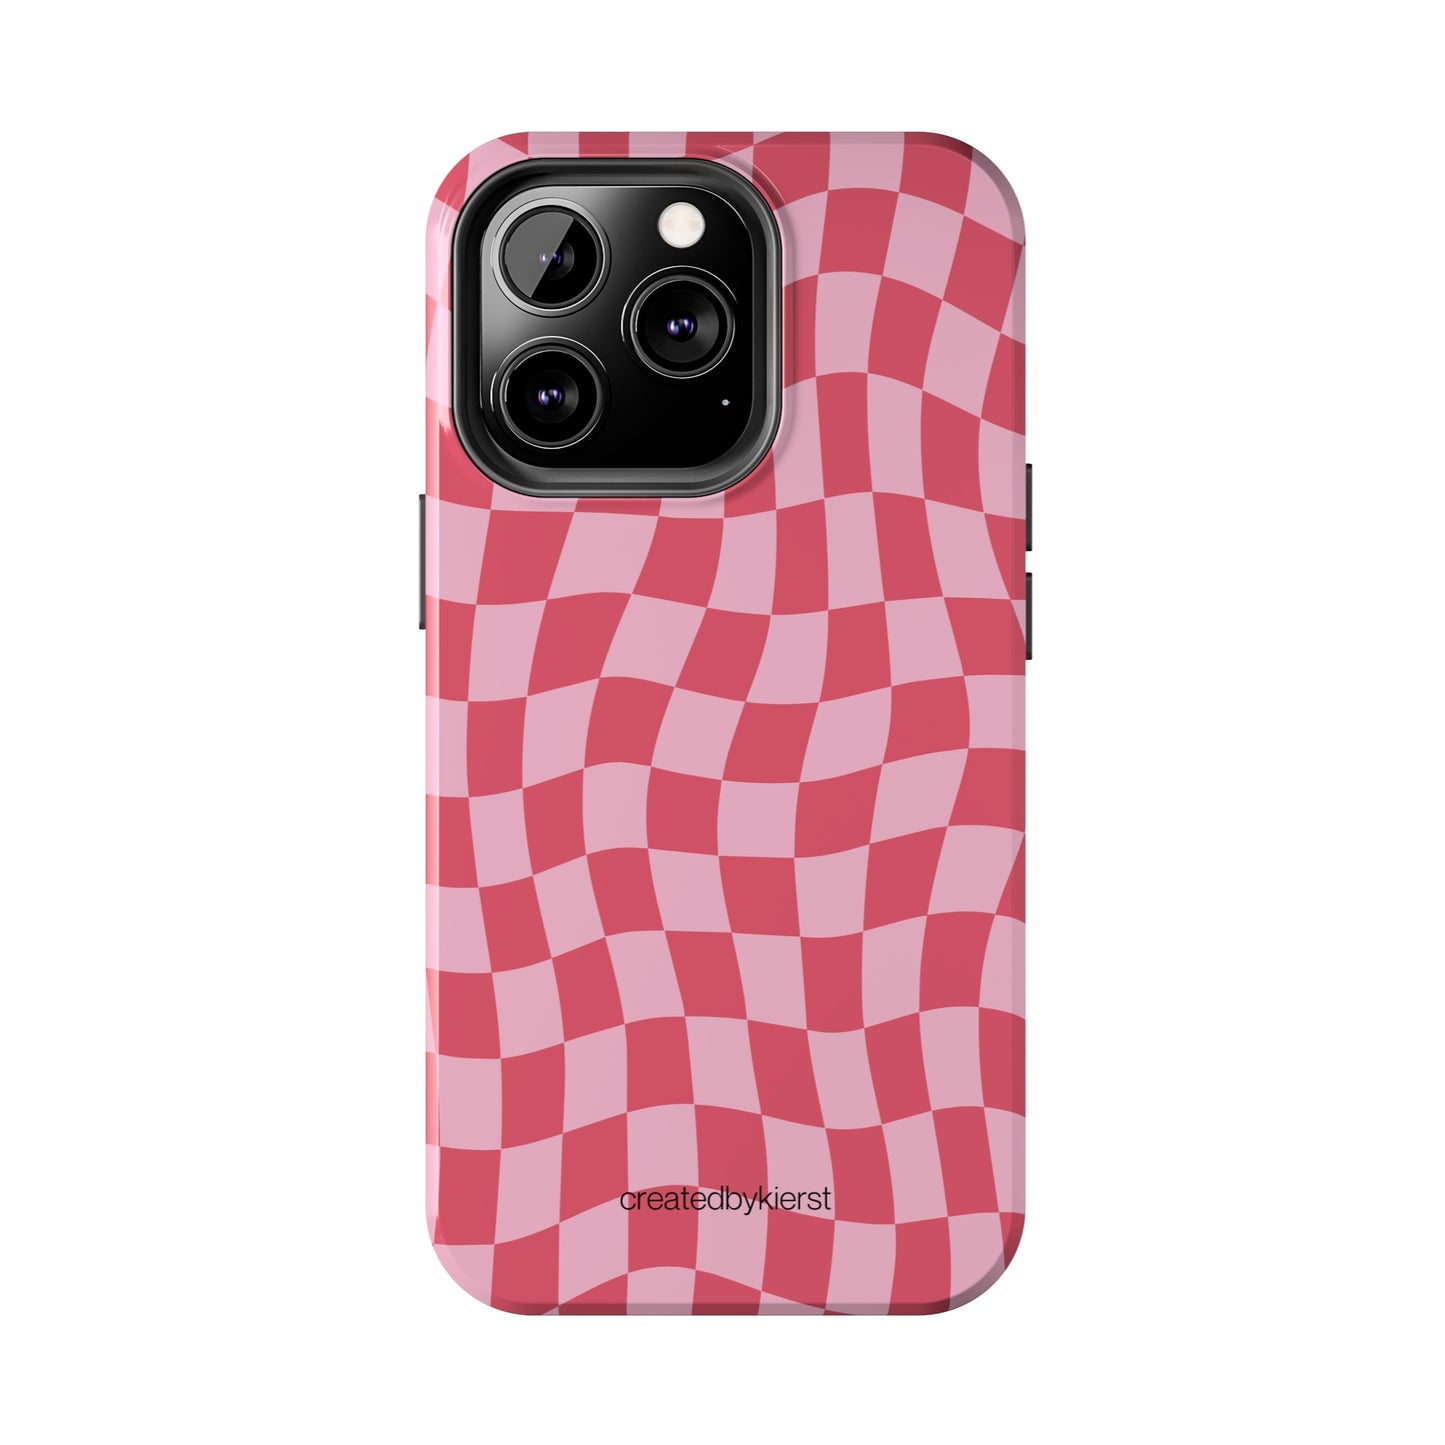 Red and Pink Wavy Checkers iPhone Case